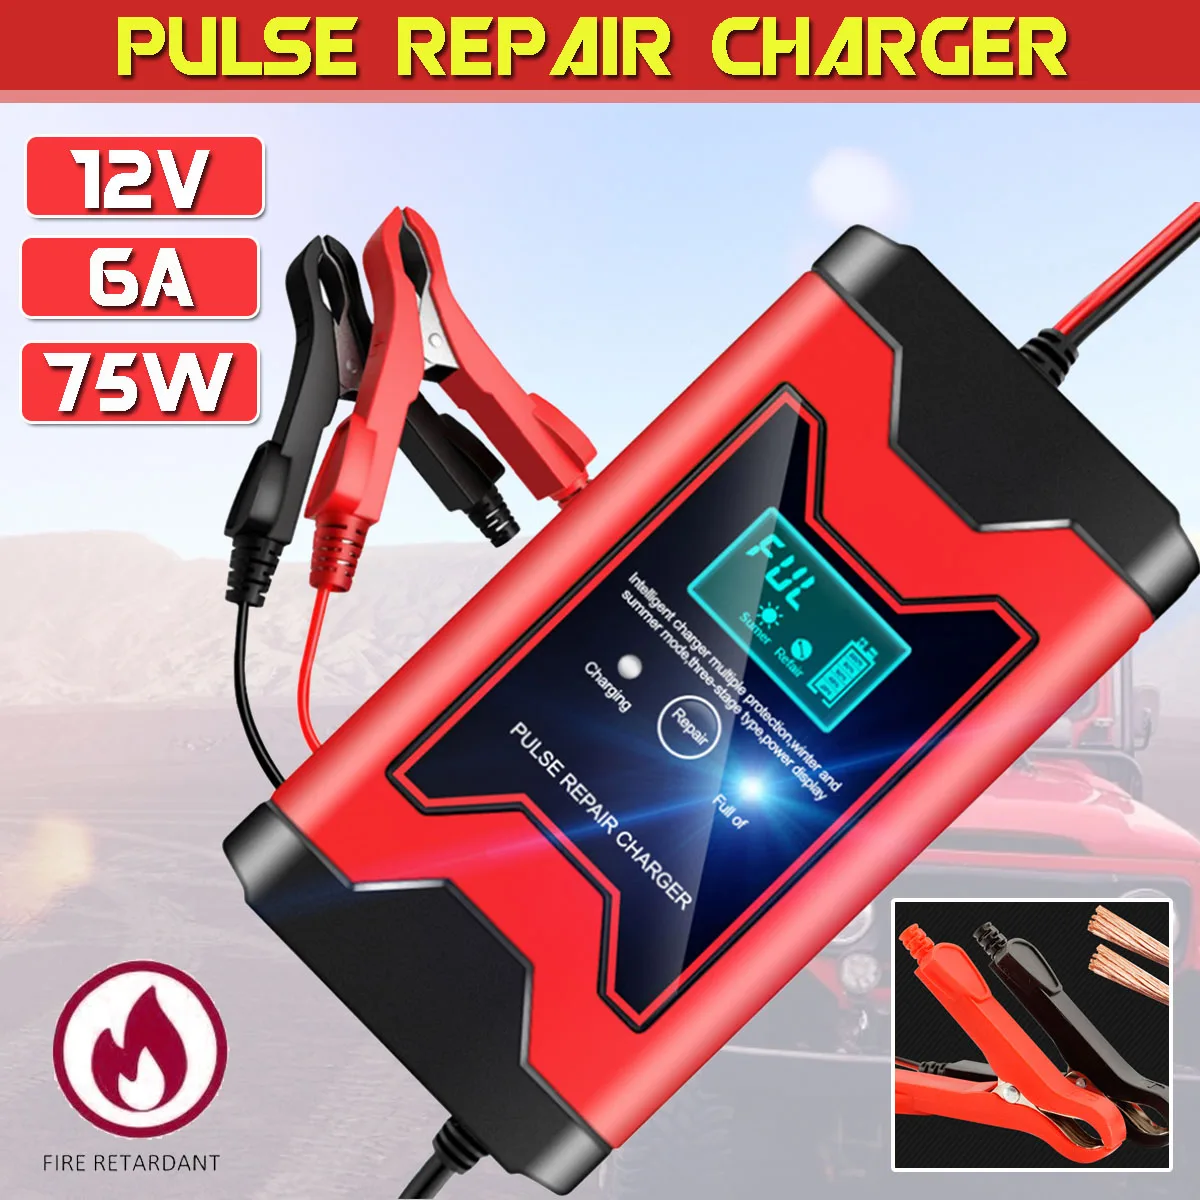 12V 6A Full Automatic Car Charger Motorcycle Battery Charger Intelligent Pulse Repair Car Cell Charger Smart Battery Maintainer